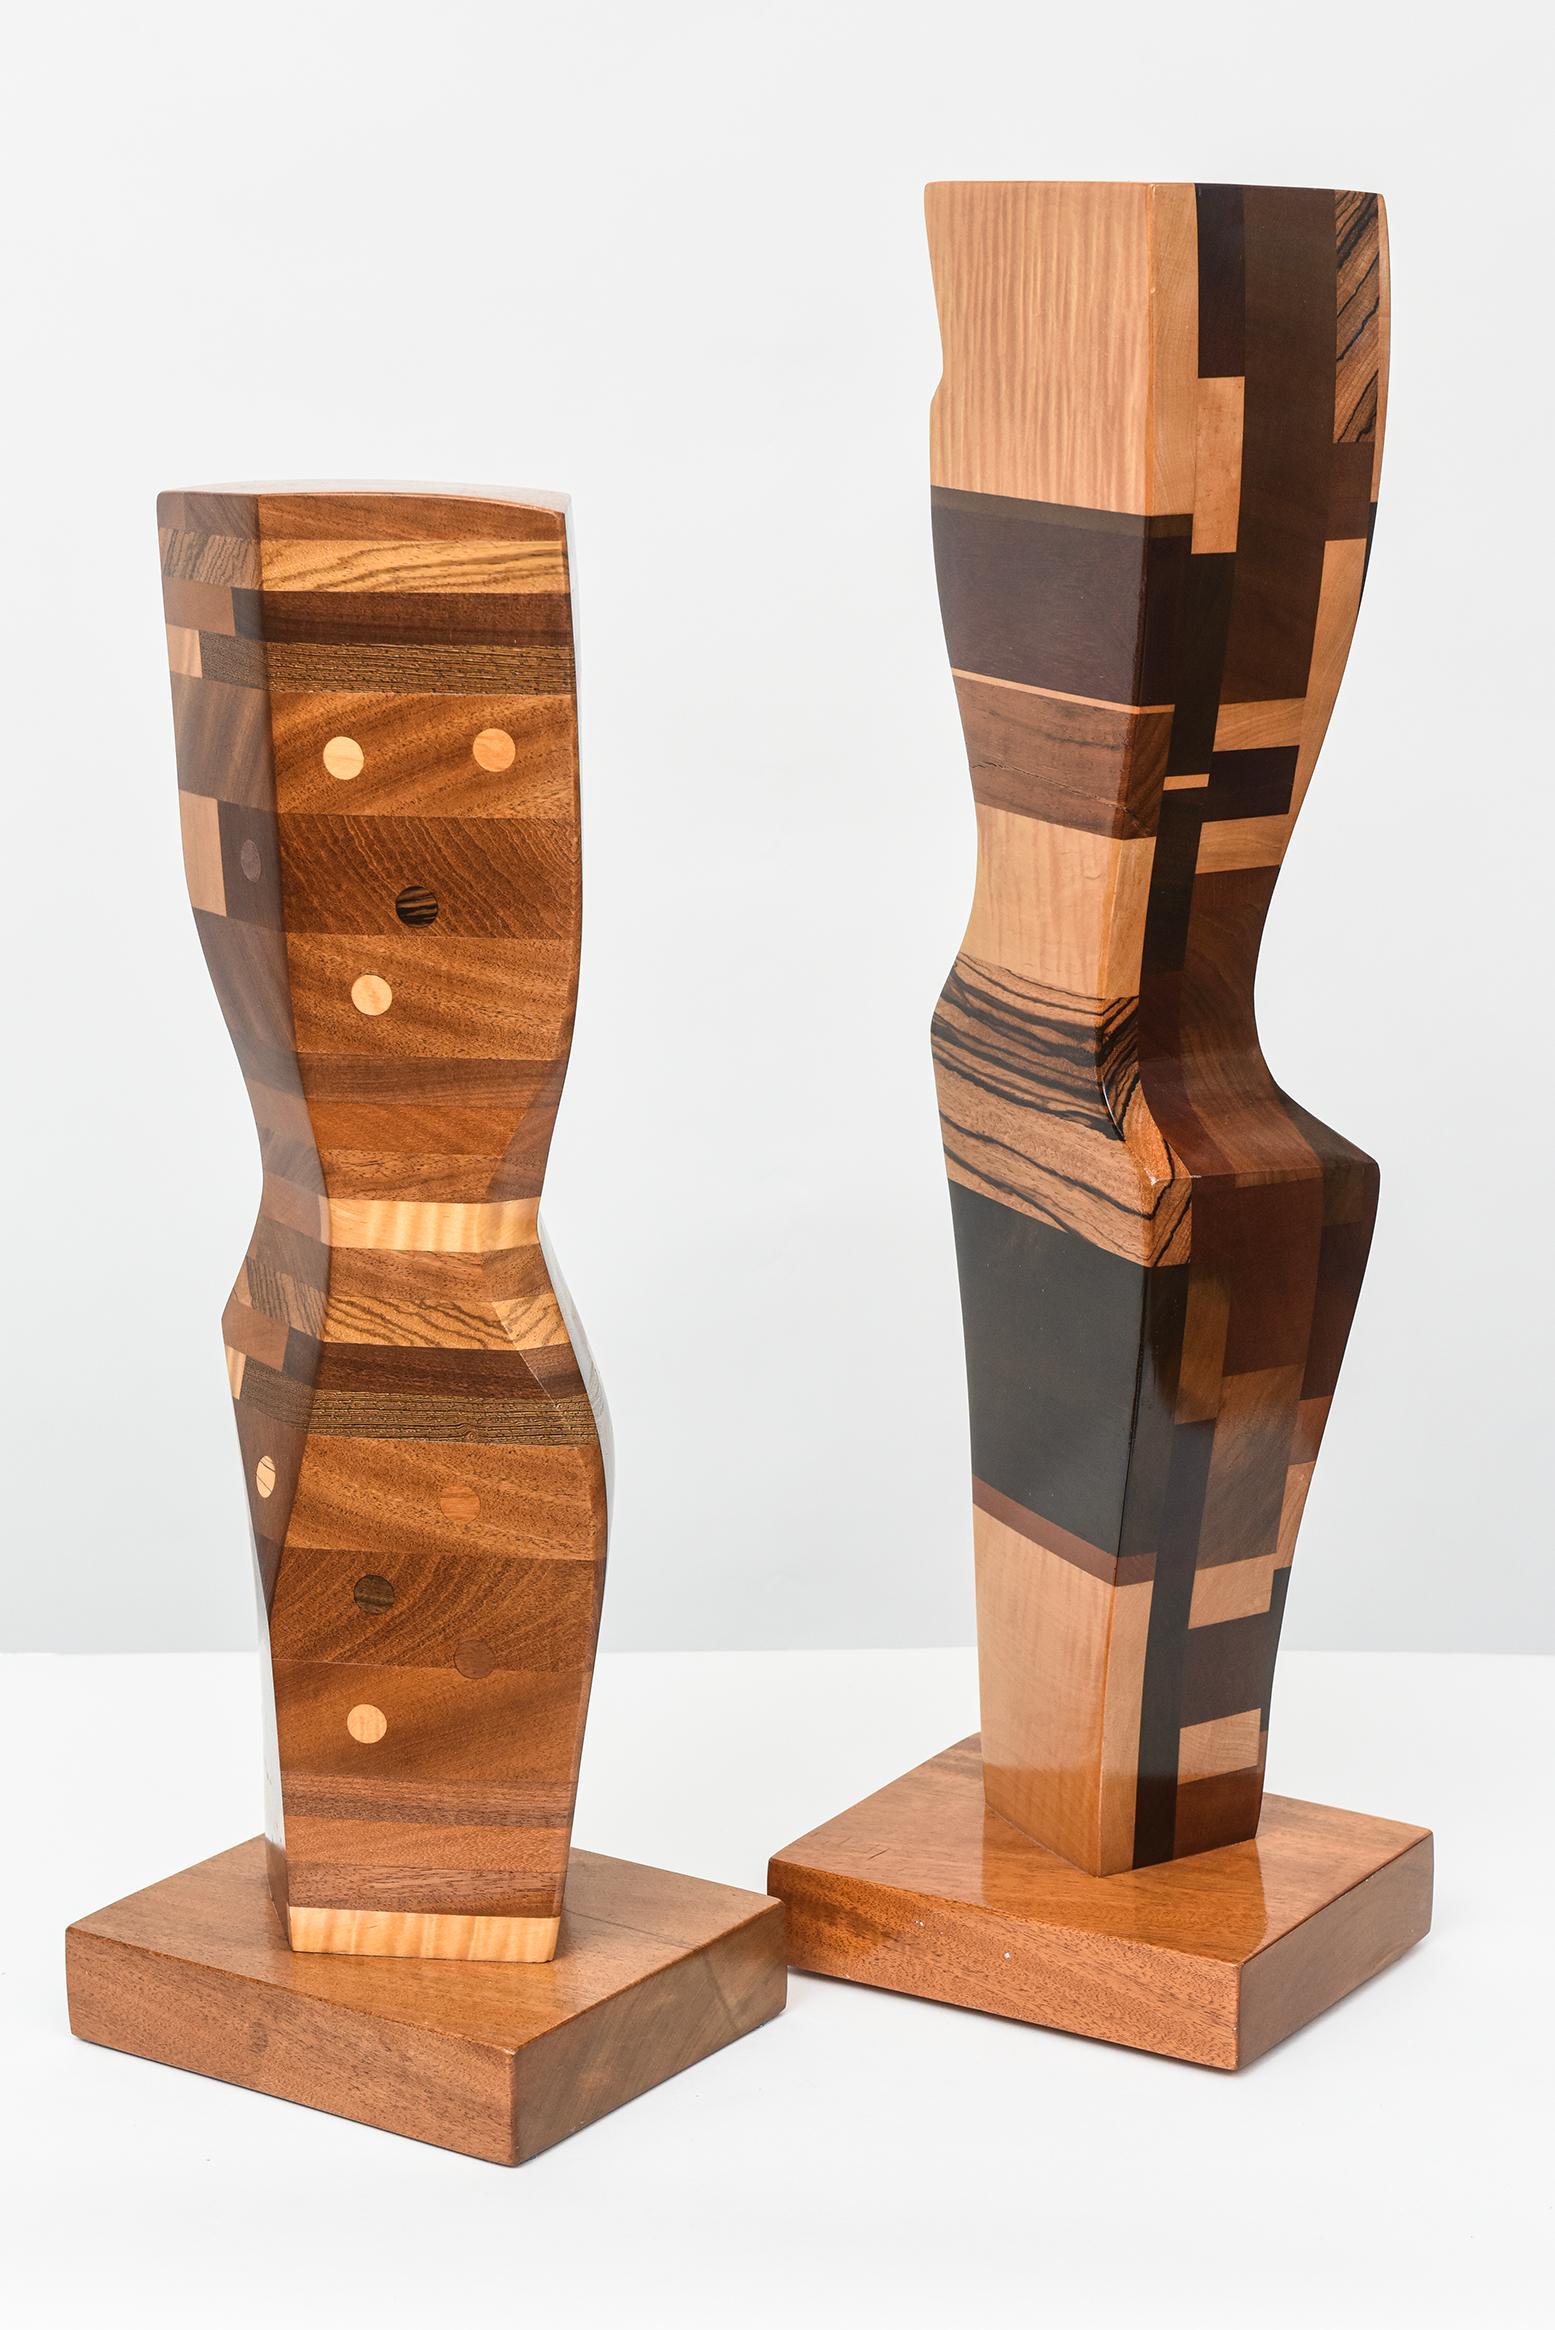 Two signed 1980s modern abstract sculptures by Paul LaMontagne, composed of stacked laminated and inlaid exotic woods. Priced and sold individually. Two available. 
Tallest: 28